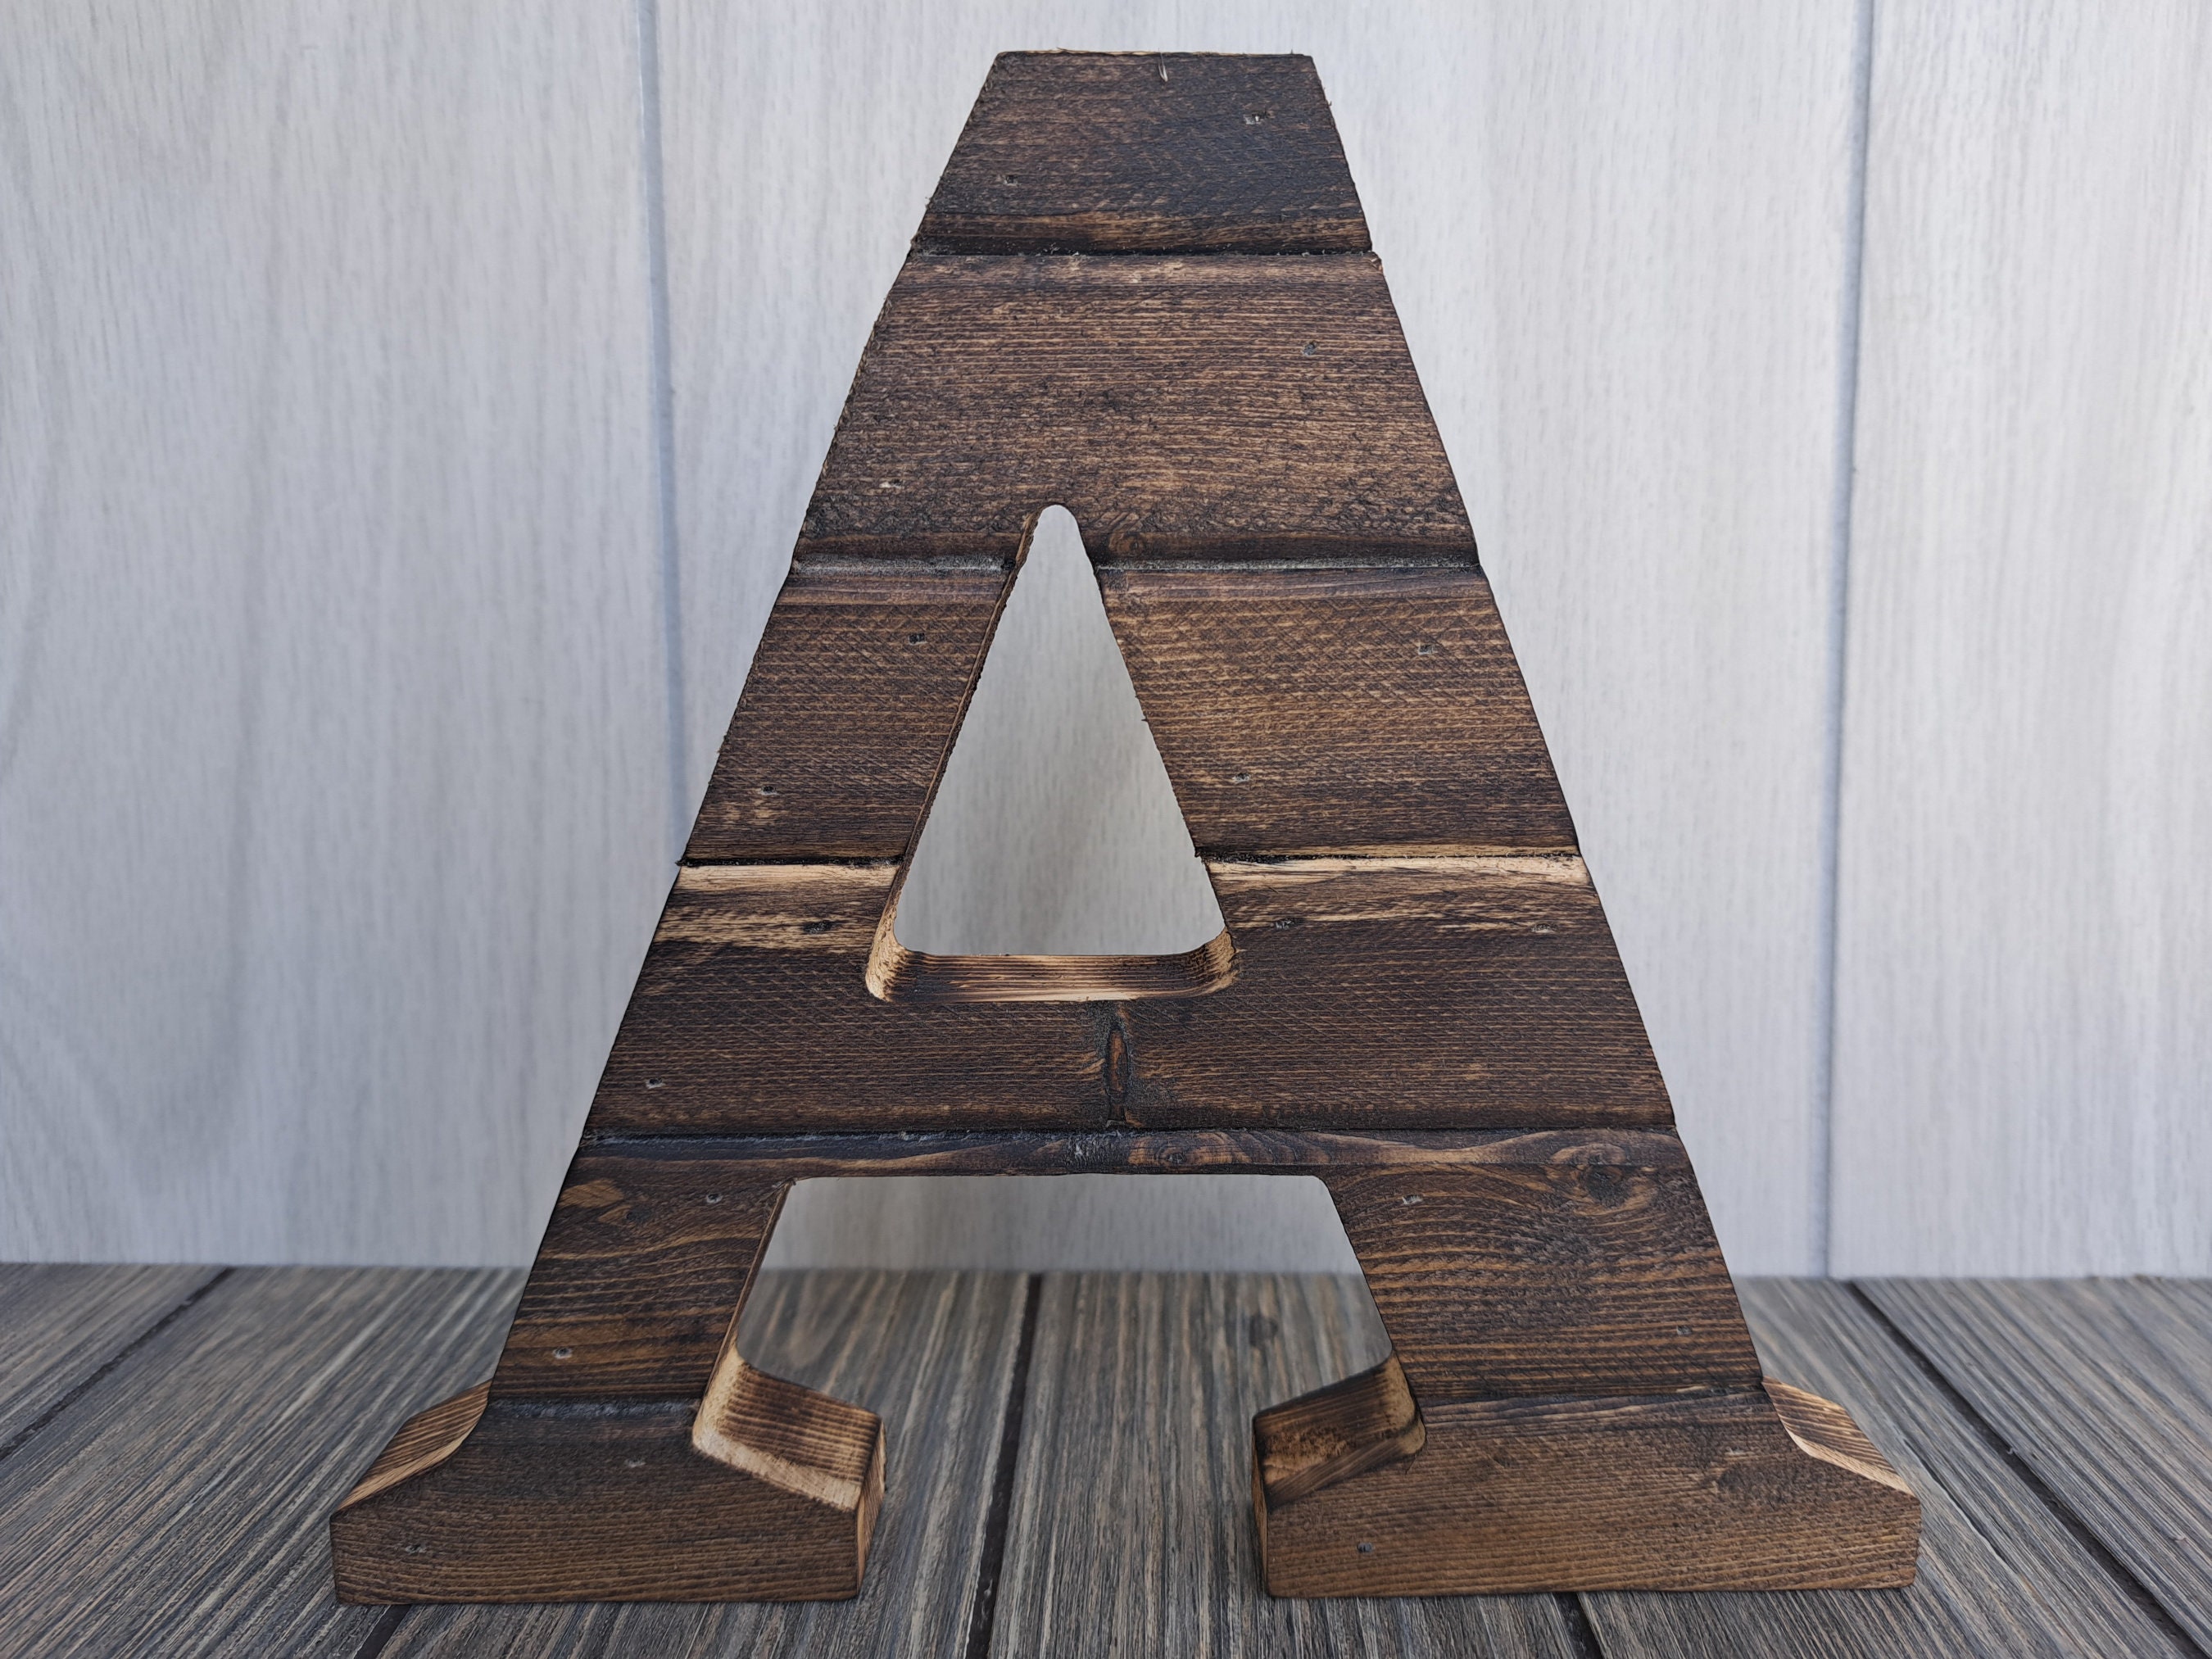 Standing Decorative Letters, Wooden Letters for Shelf, Custom